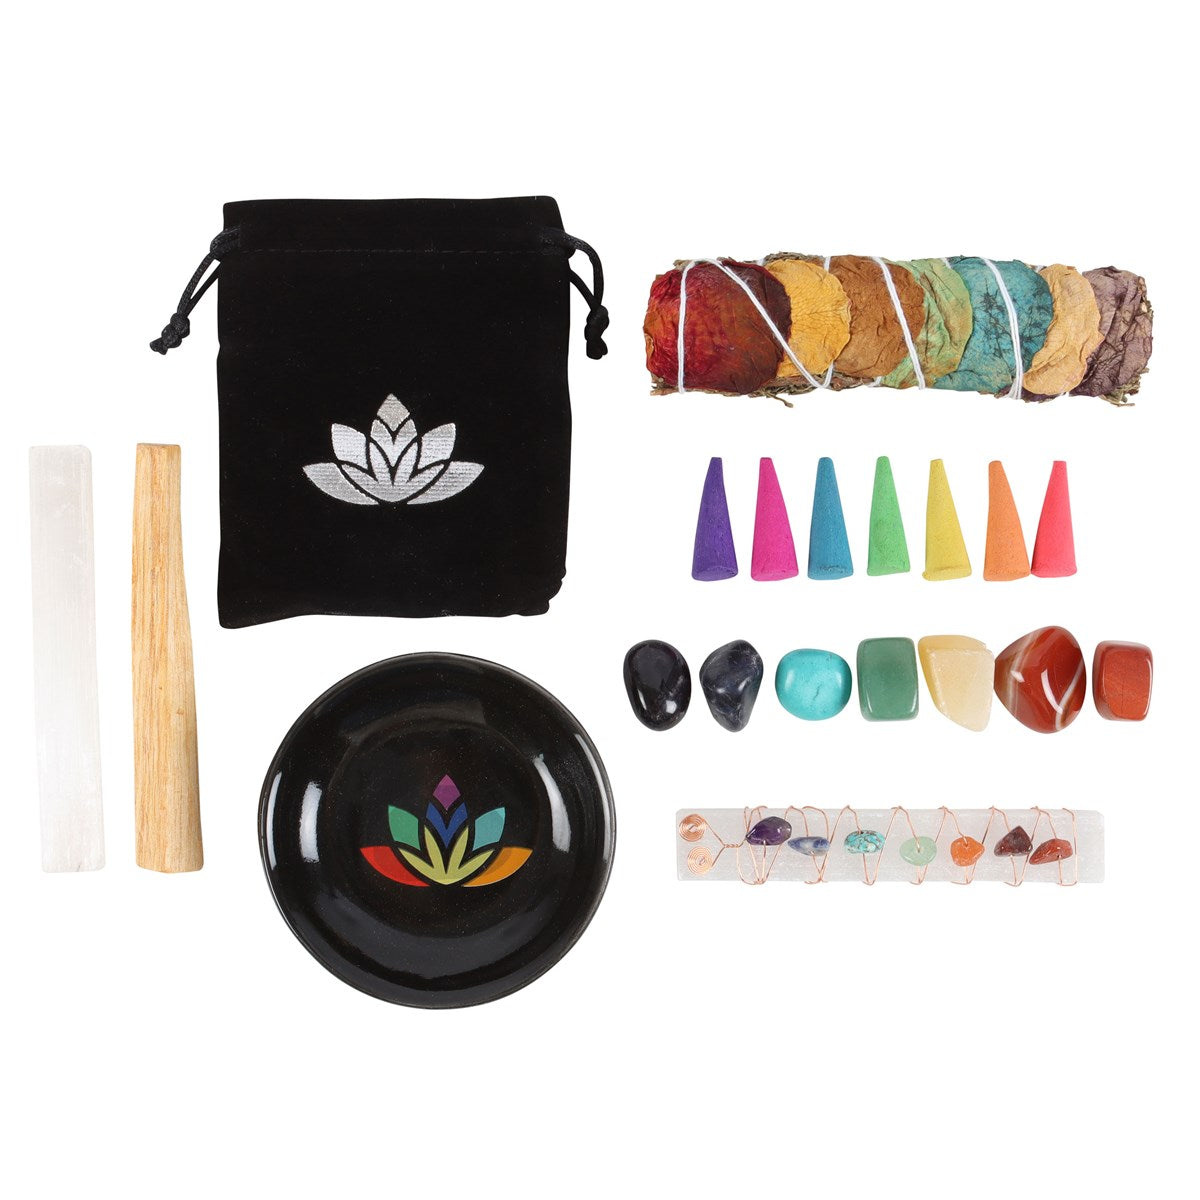 SACRED CHAKRA DELUXE HEALING AND WELLNESS KIT